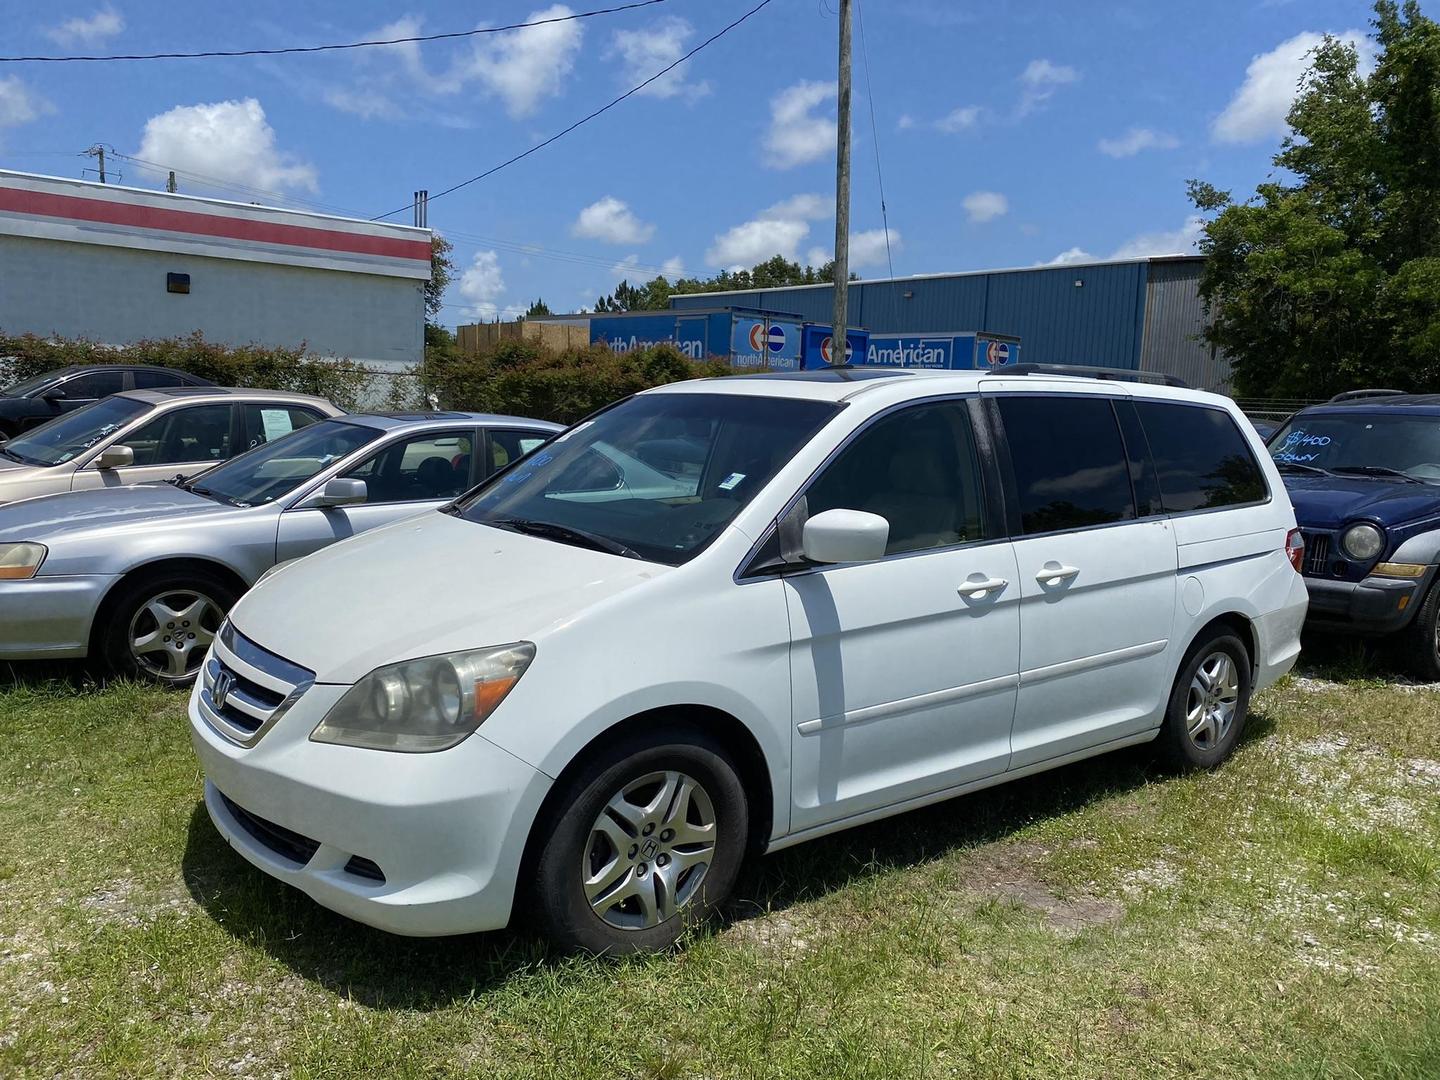 USED HONDA ODYSSEY 2005 for sale in Gulfport, MS National Auto Sales